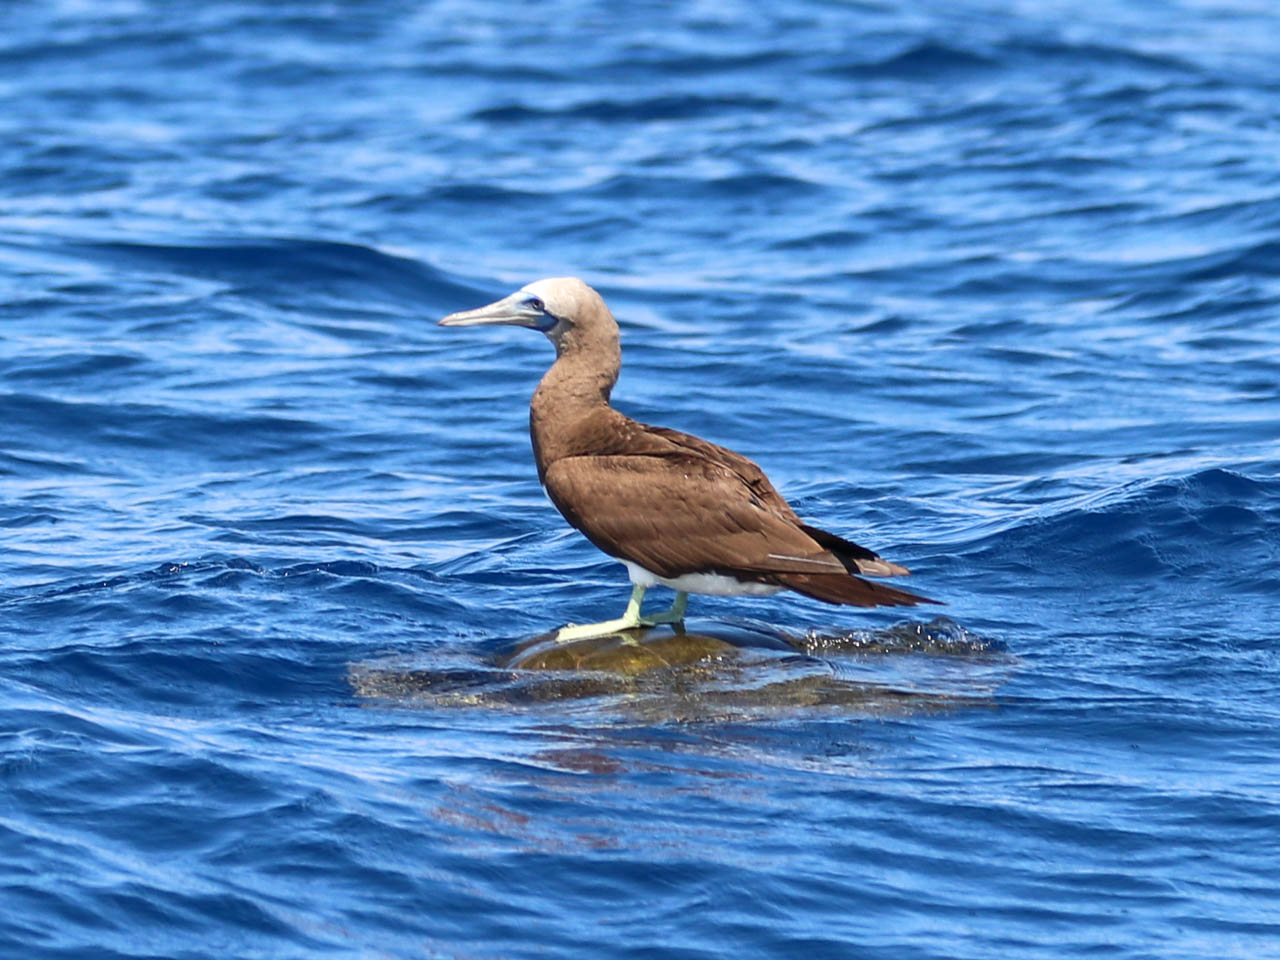 Juvenile brown booby perched on an Olive Ridley sea turtle